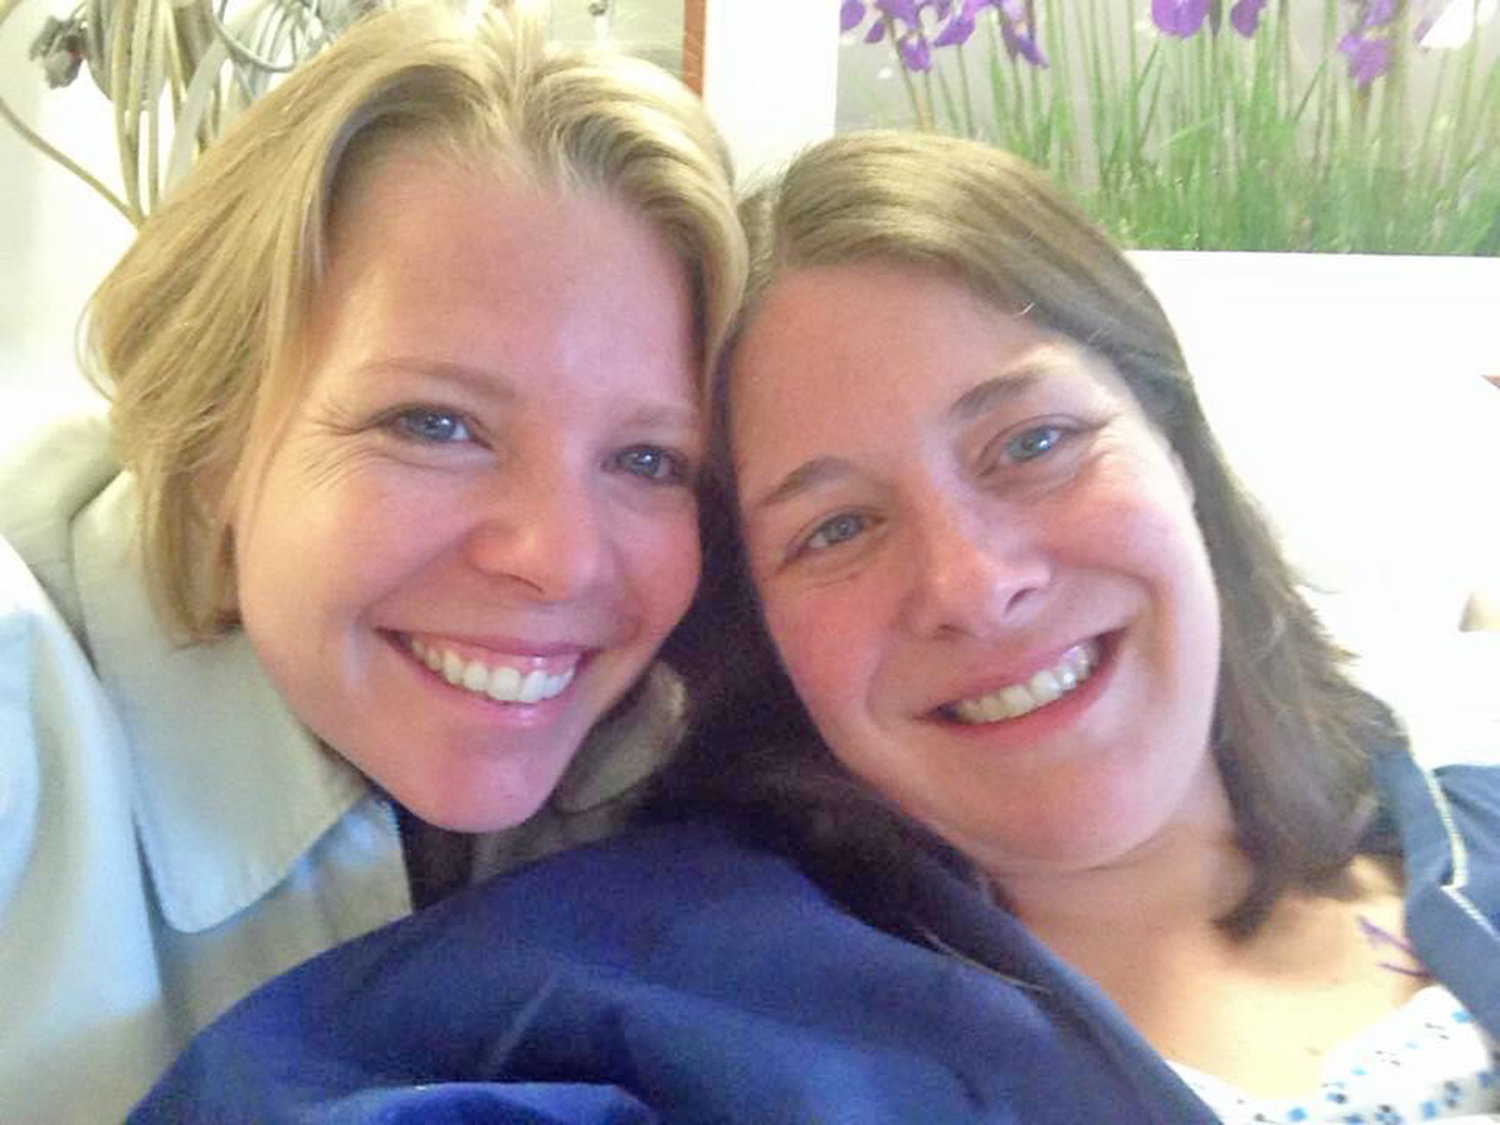 Holly Powers and Dawn Cooley moments before surgery at Memorial Sloan Kettering Cancer Center in New York City. Powers traveled from Virginia, to support her sister on the day of surgery.